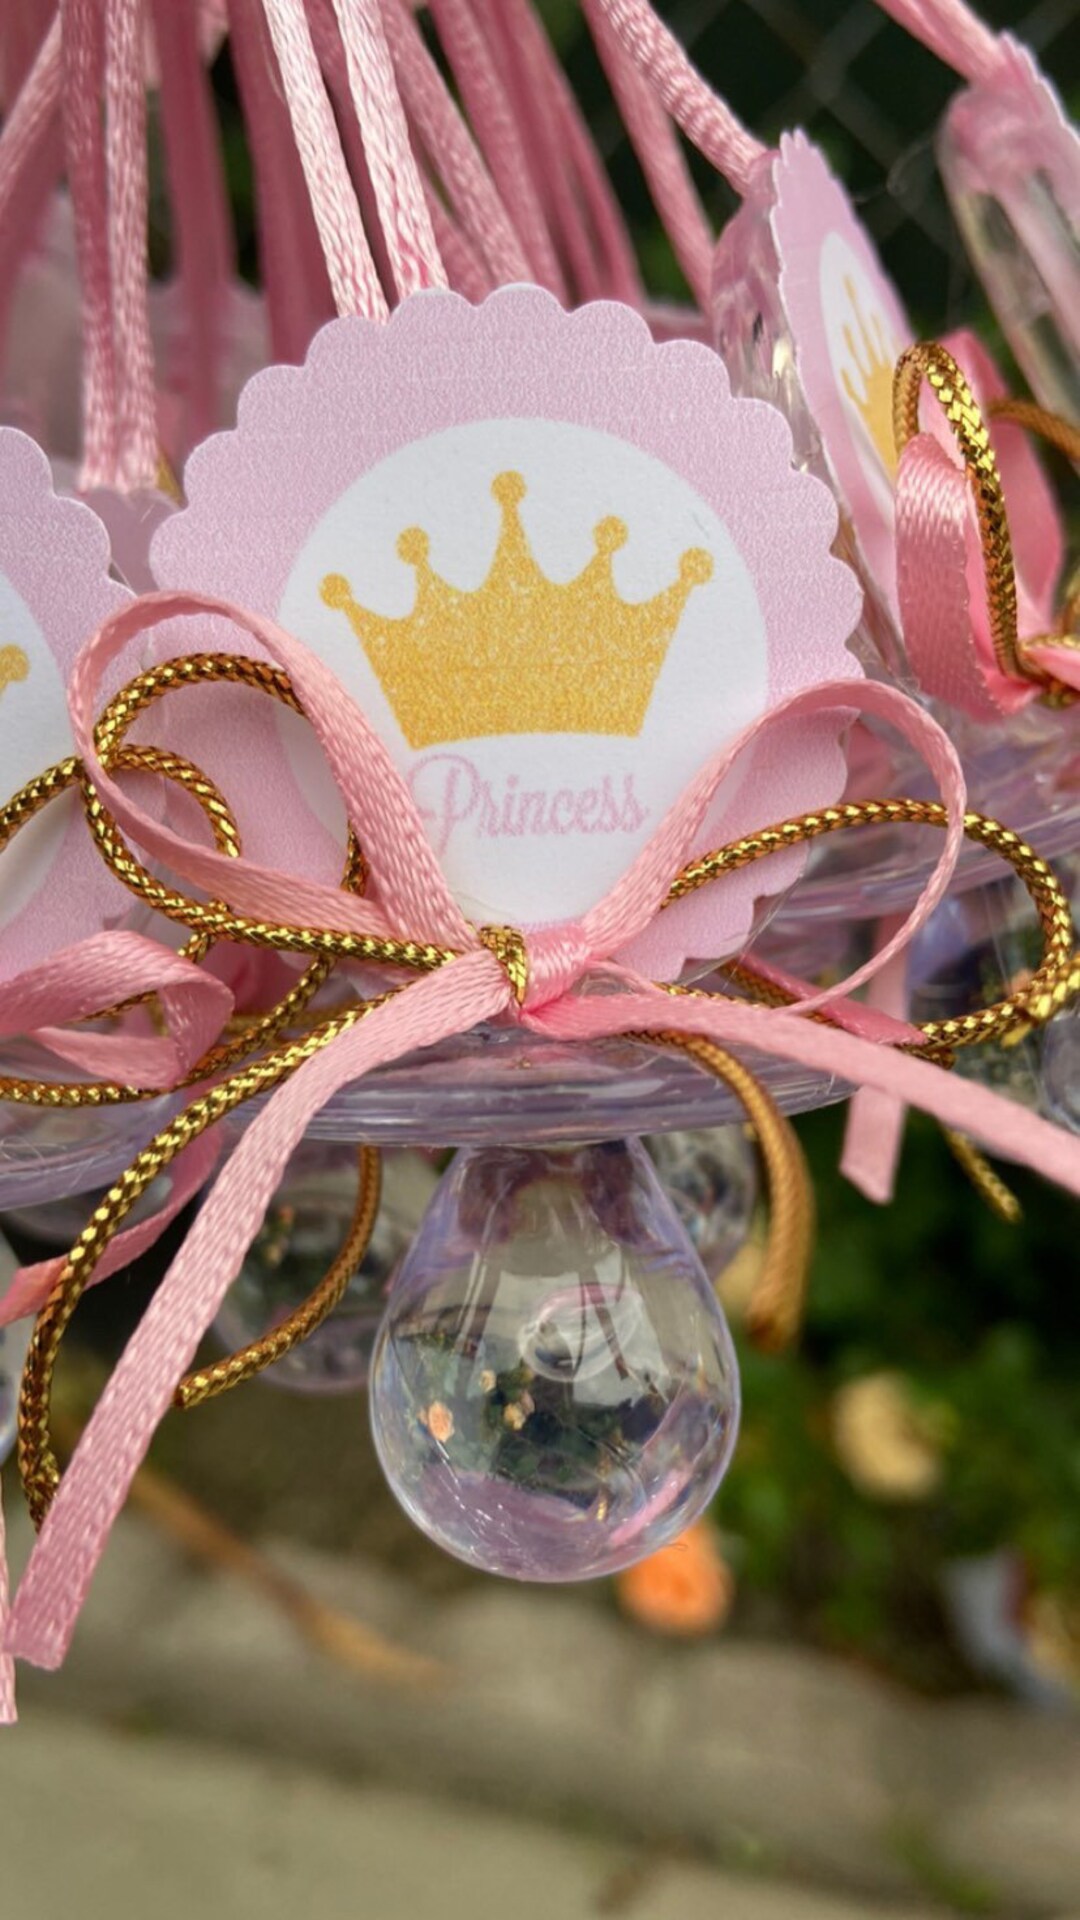 Baby Shower Favors, Baby Pacifiers, Its A Girl, Recuerdos Baby Shower ...